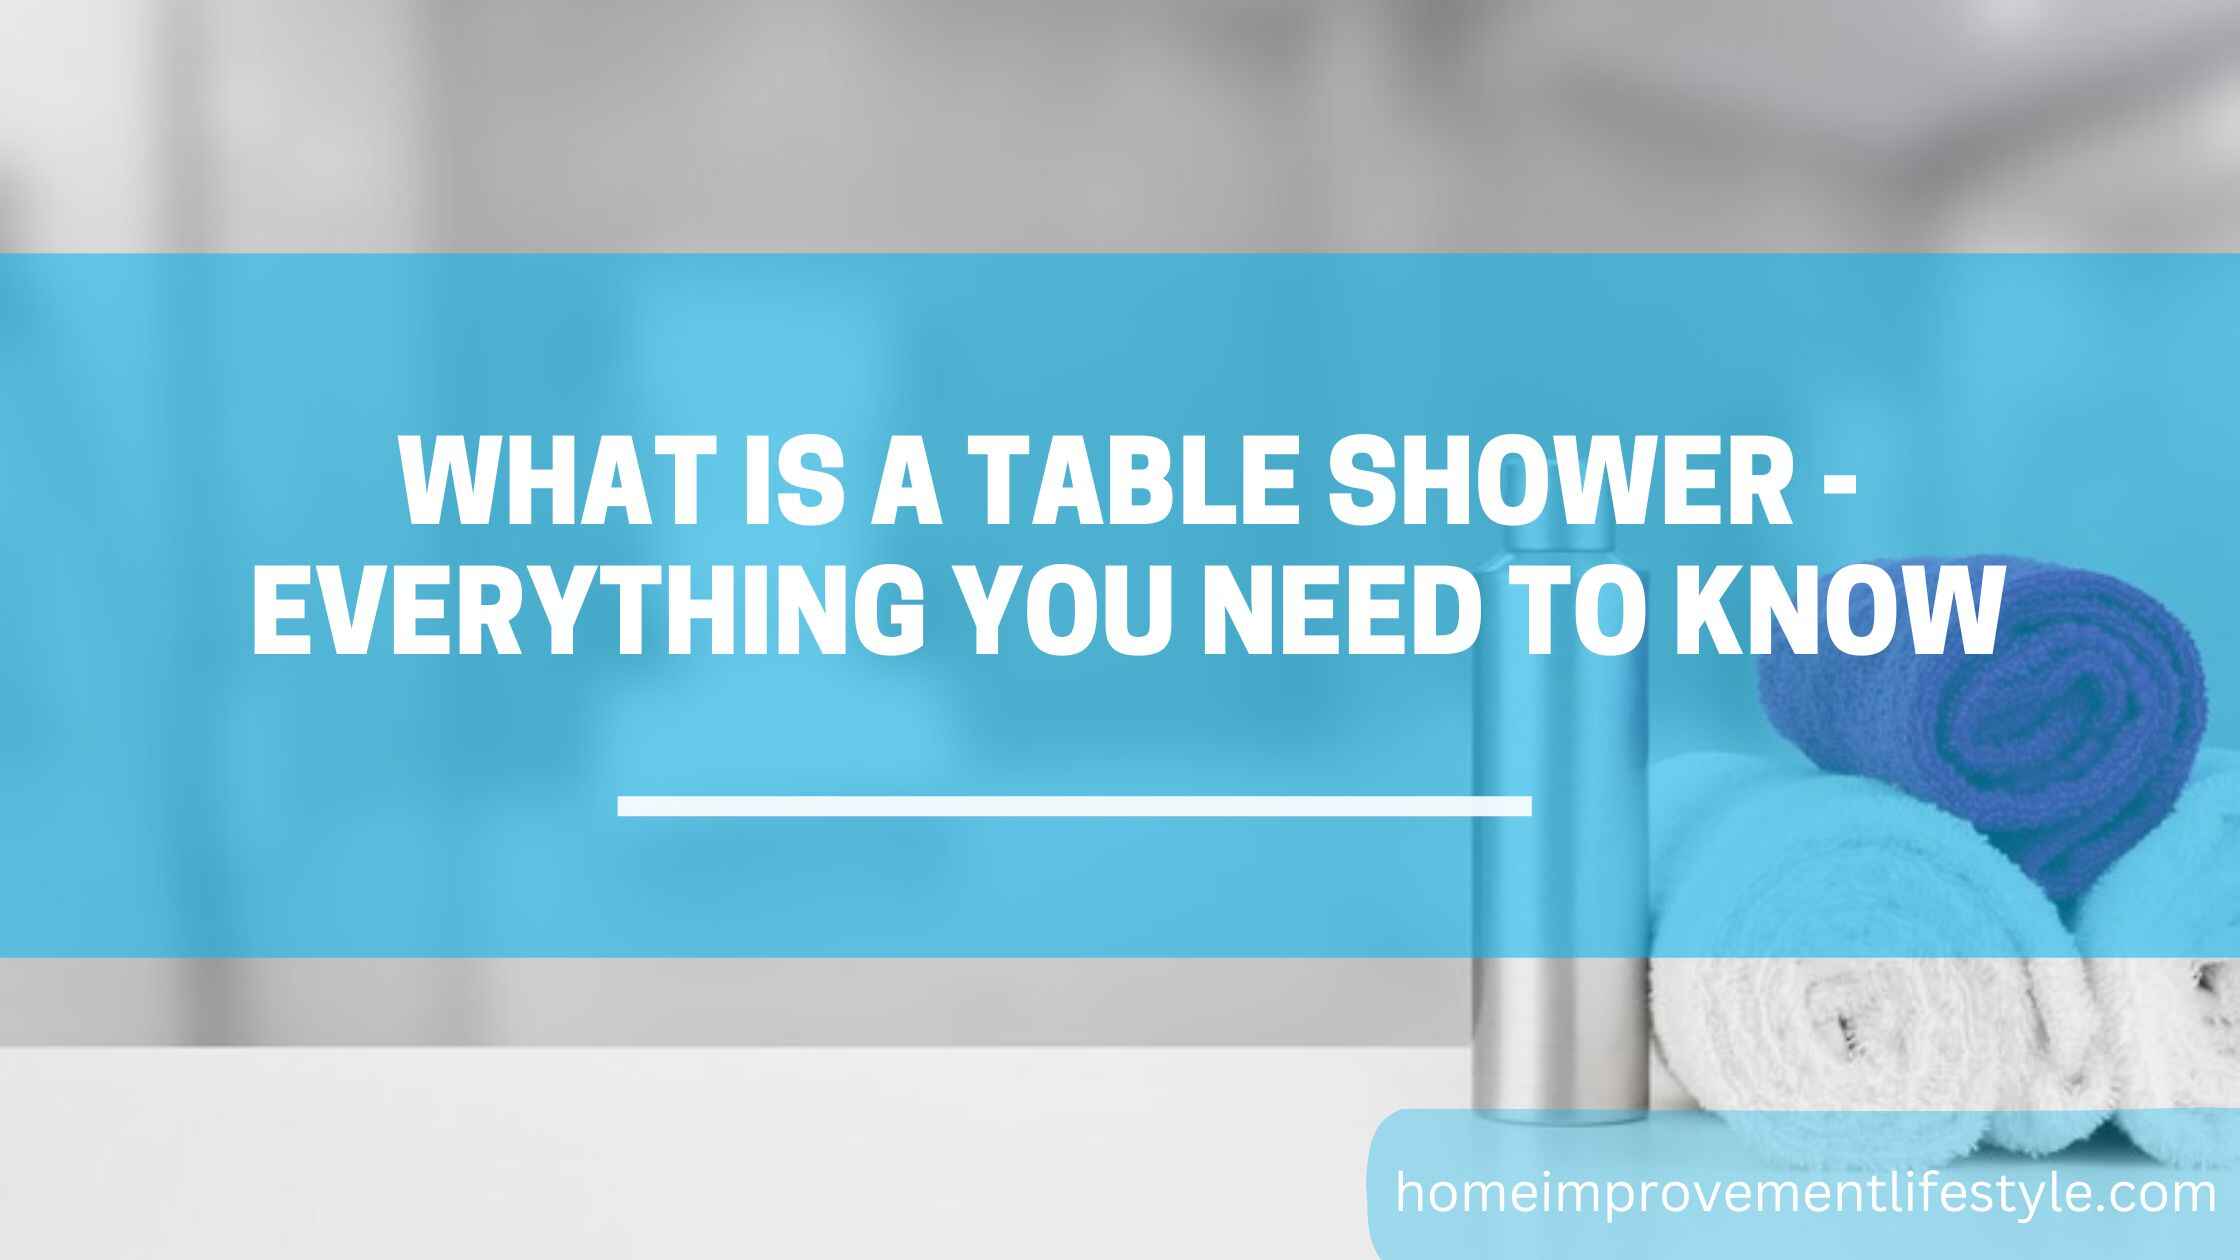 What is a Table Shower - Everything you need to know